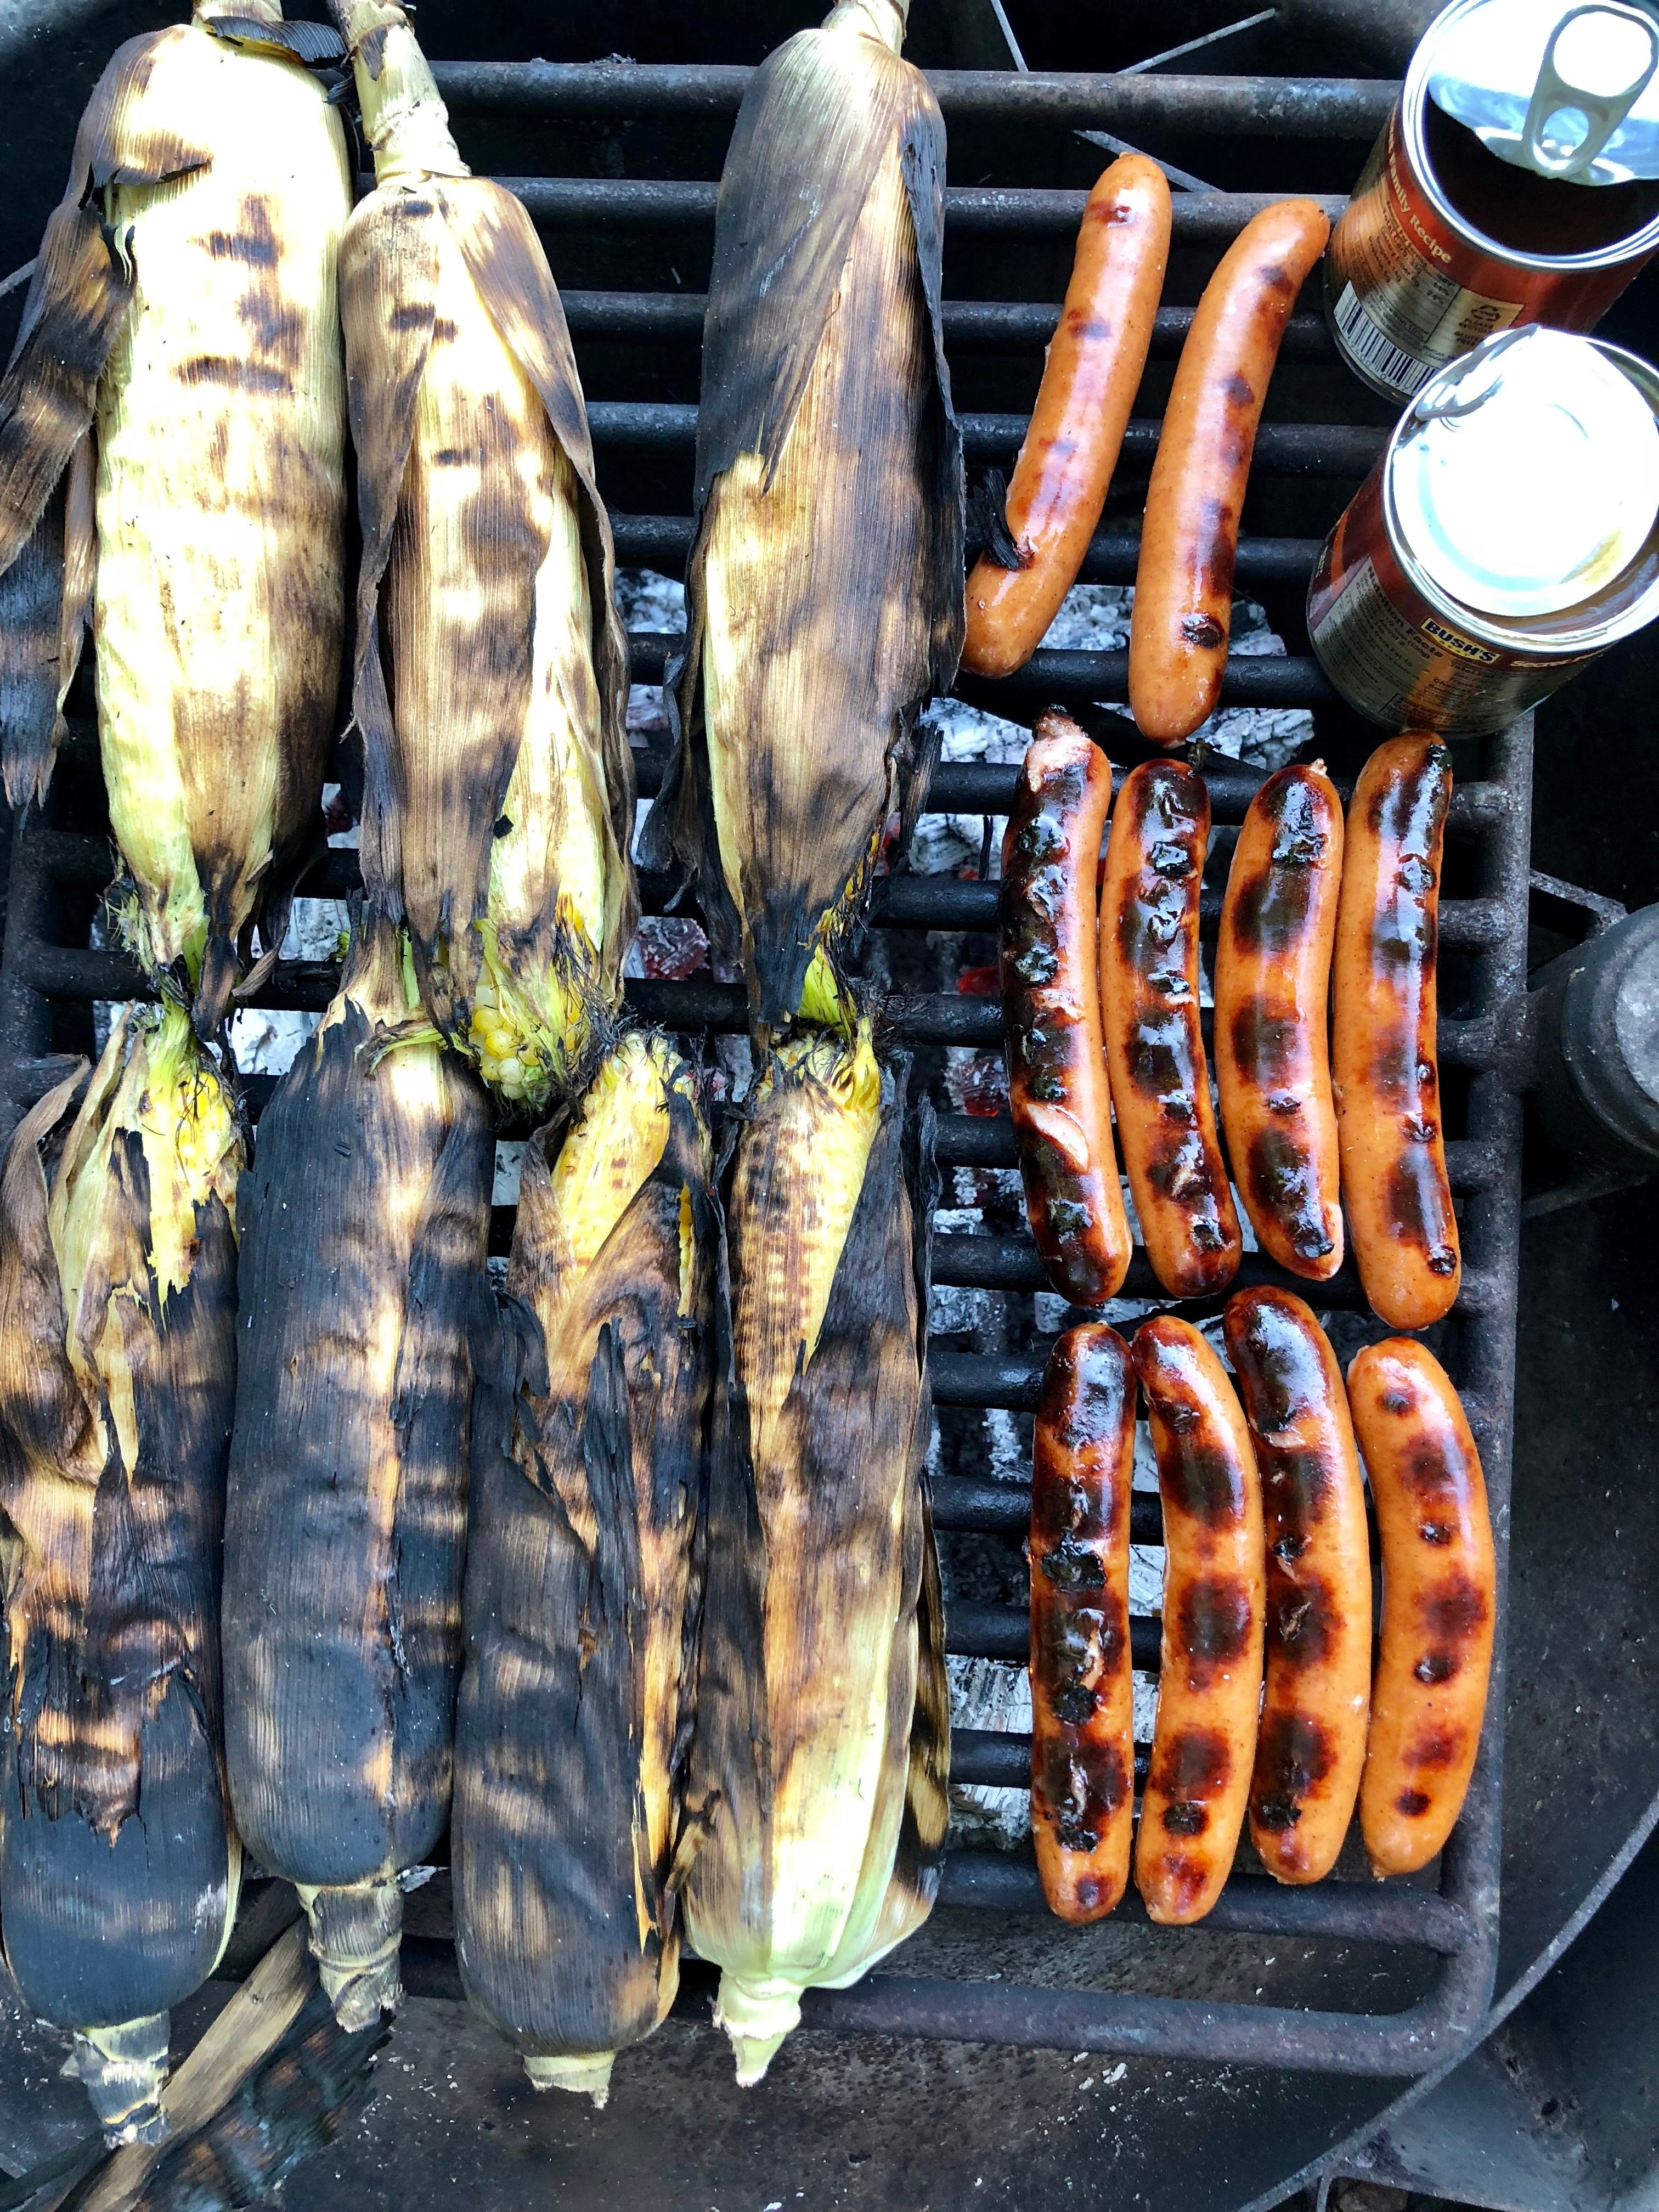 Fire pits had nice grated. Made some really yummy local sweet corn!